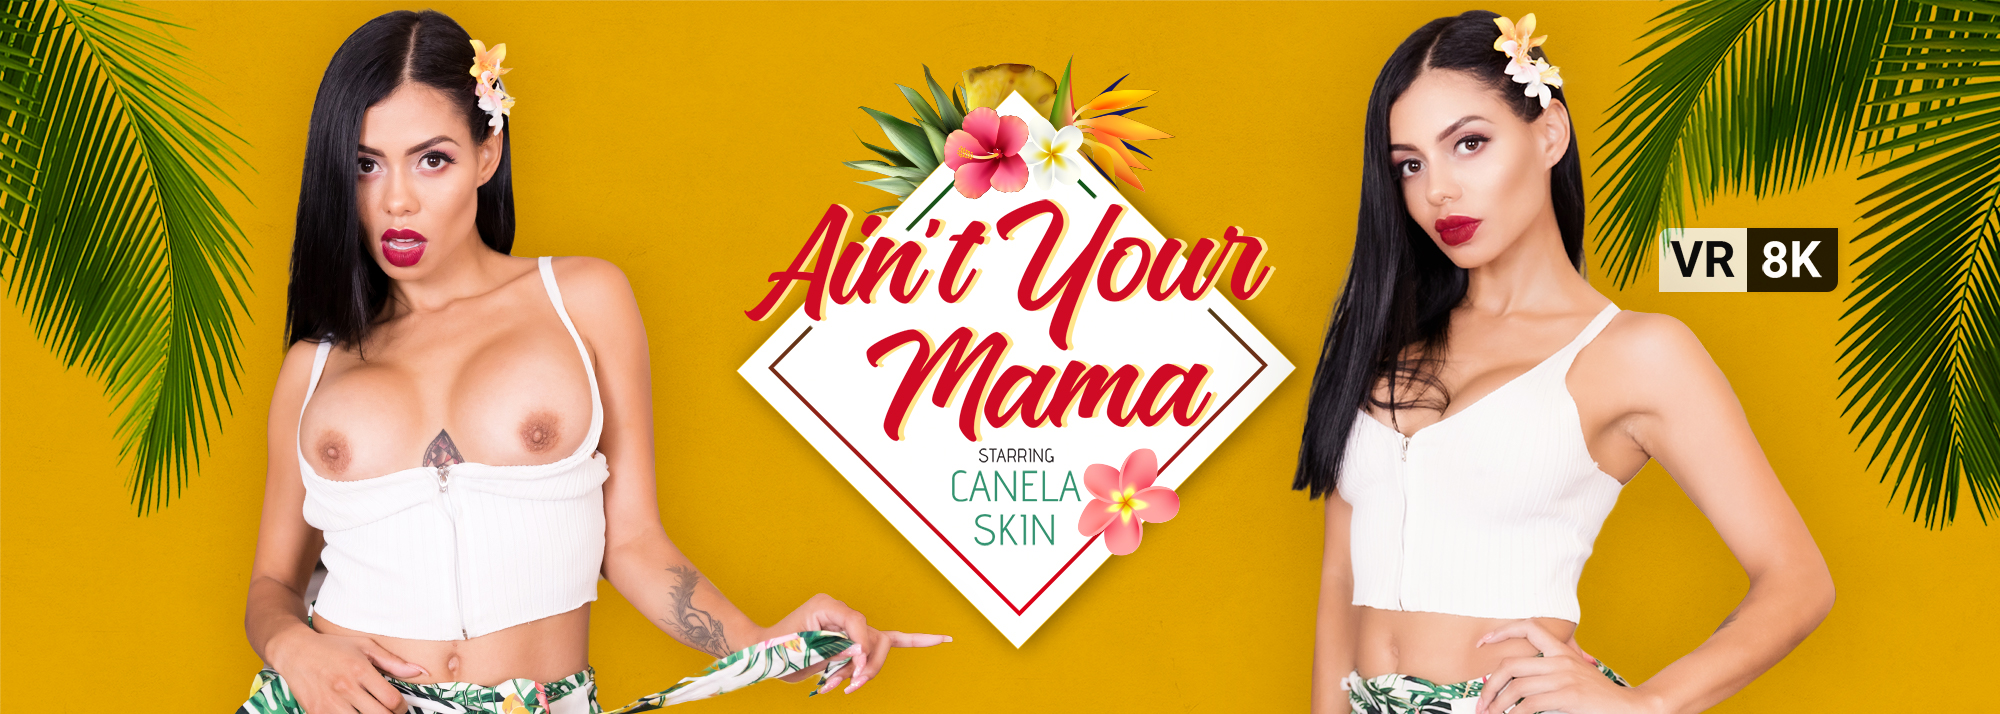 Ain't Your Mama with Canela Skin  Slideshow